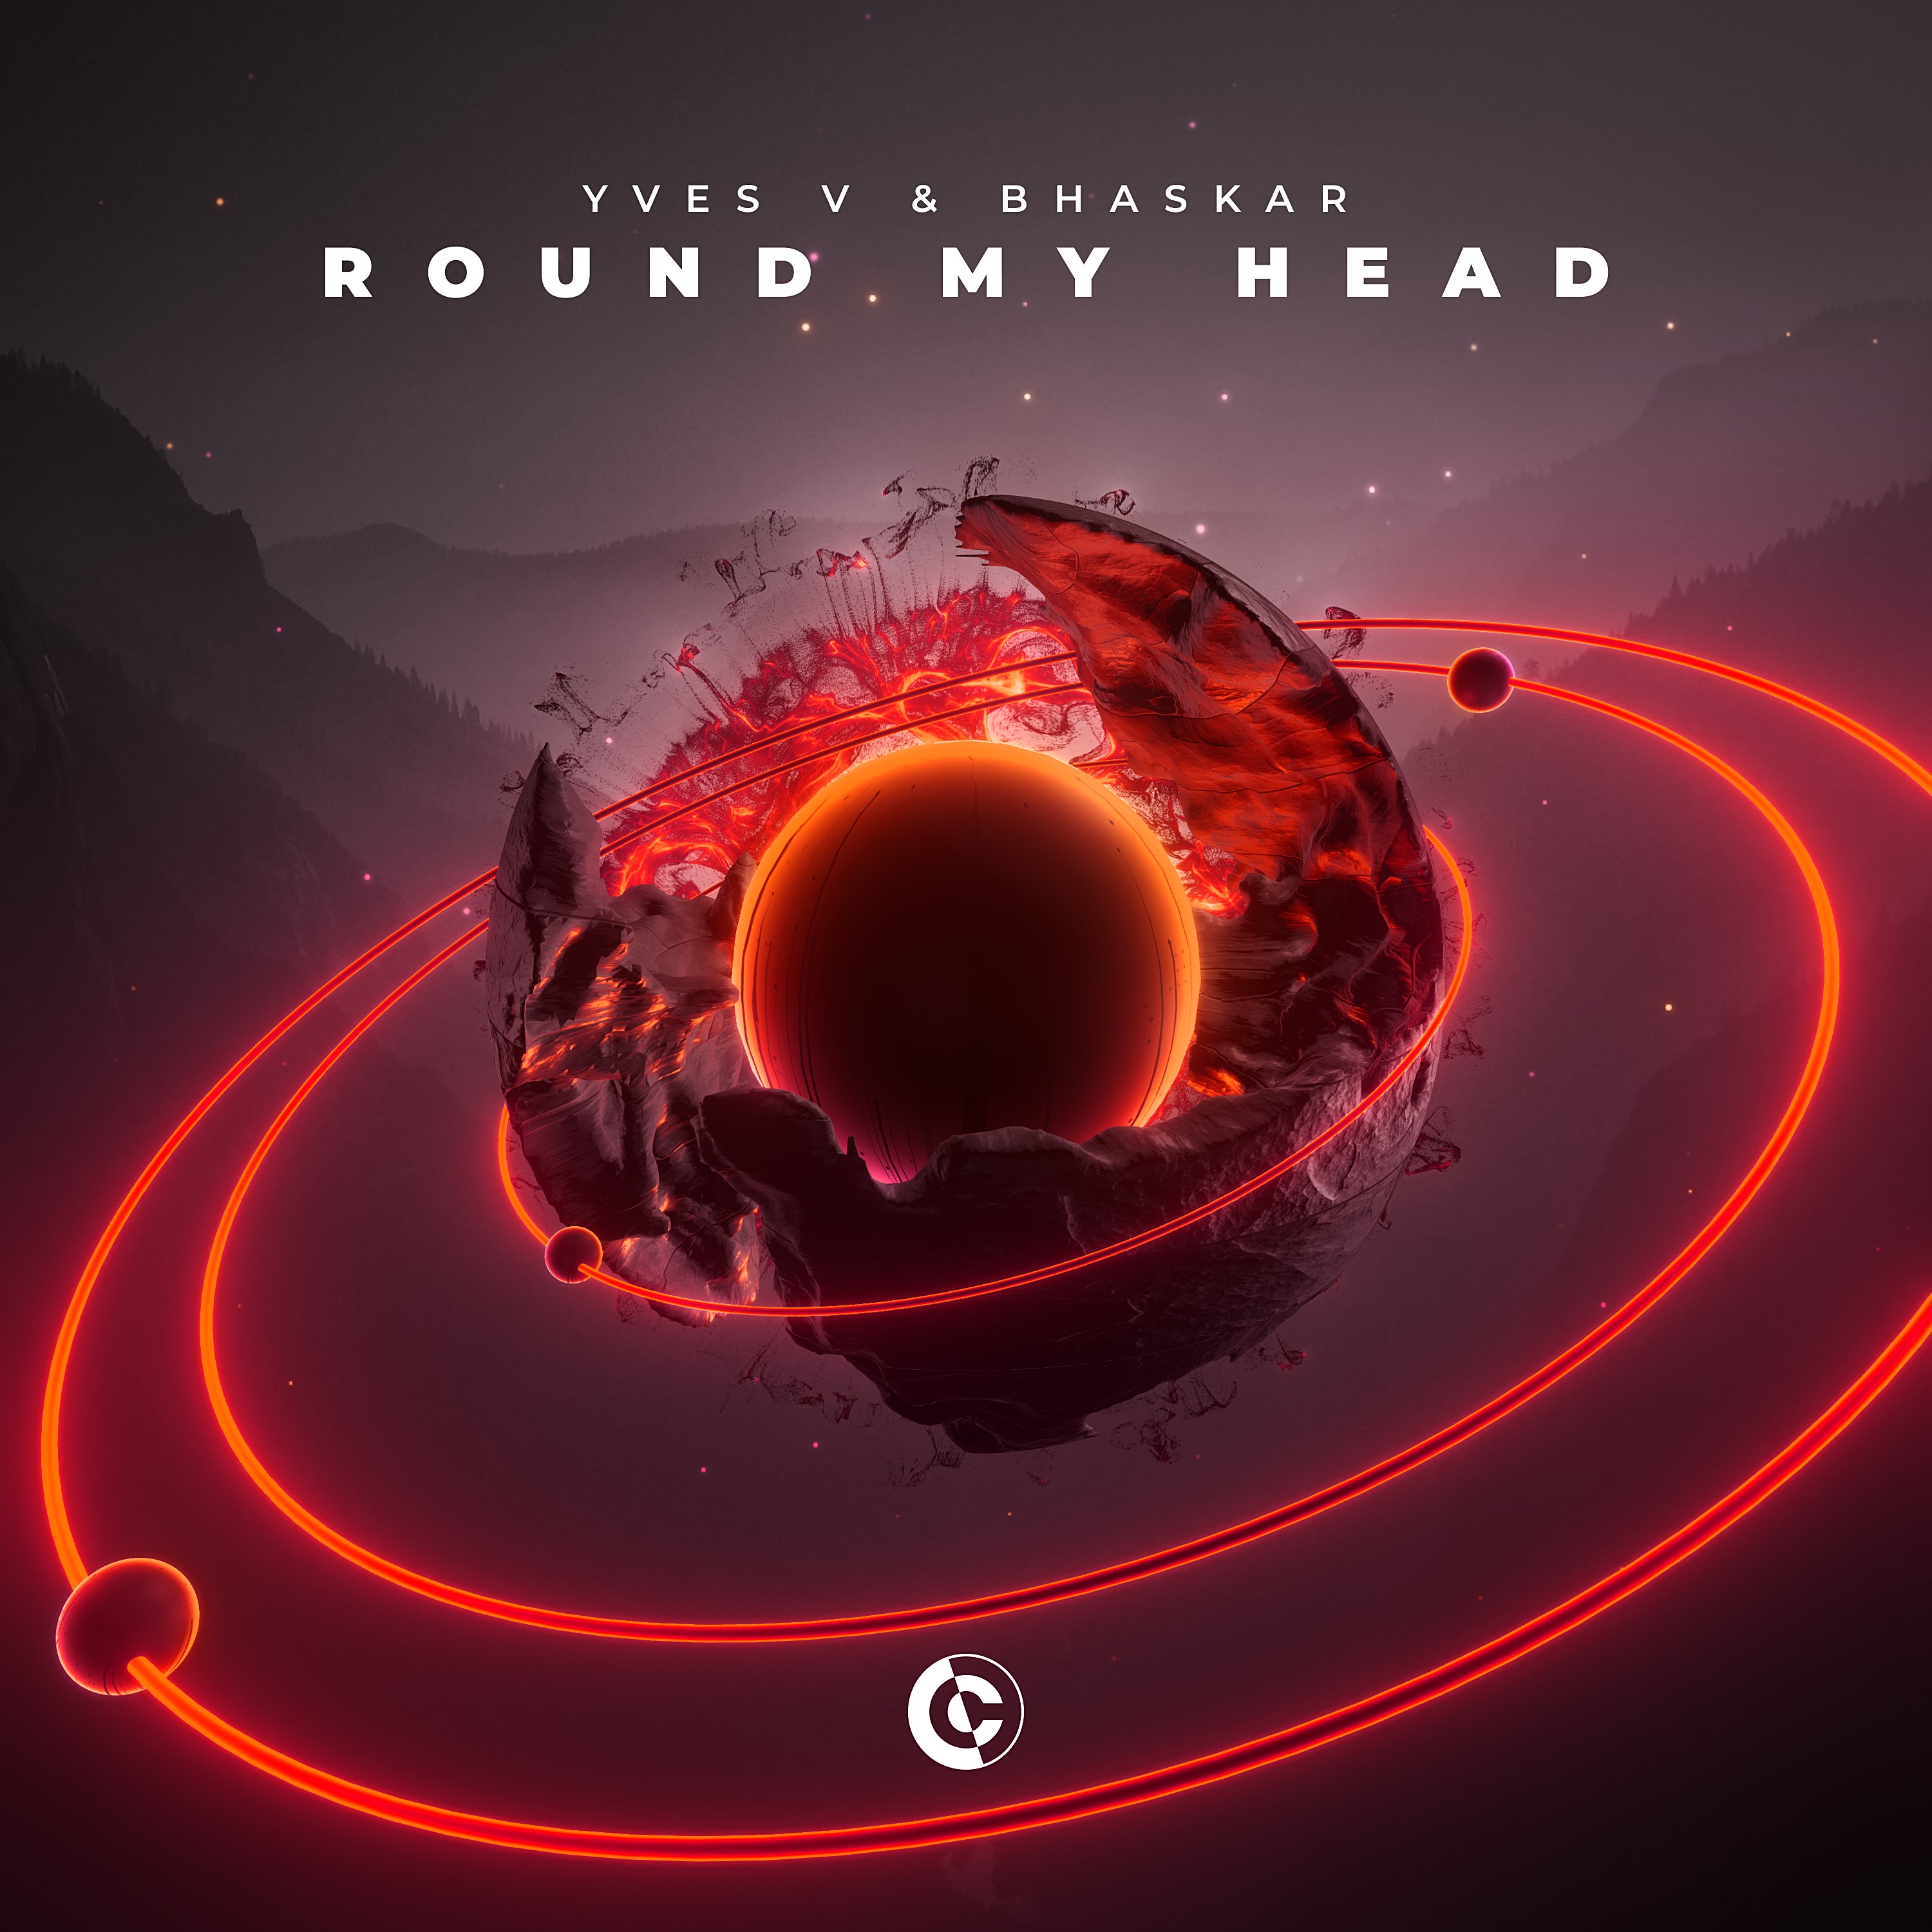 Yves V Returns to CONTROVERSIA With Label’s Bhaskar For Dance-Pop Earworm “Round My Head”